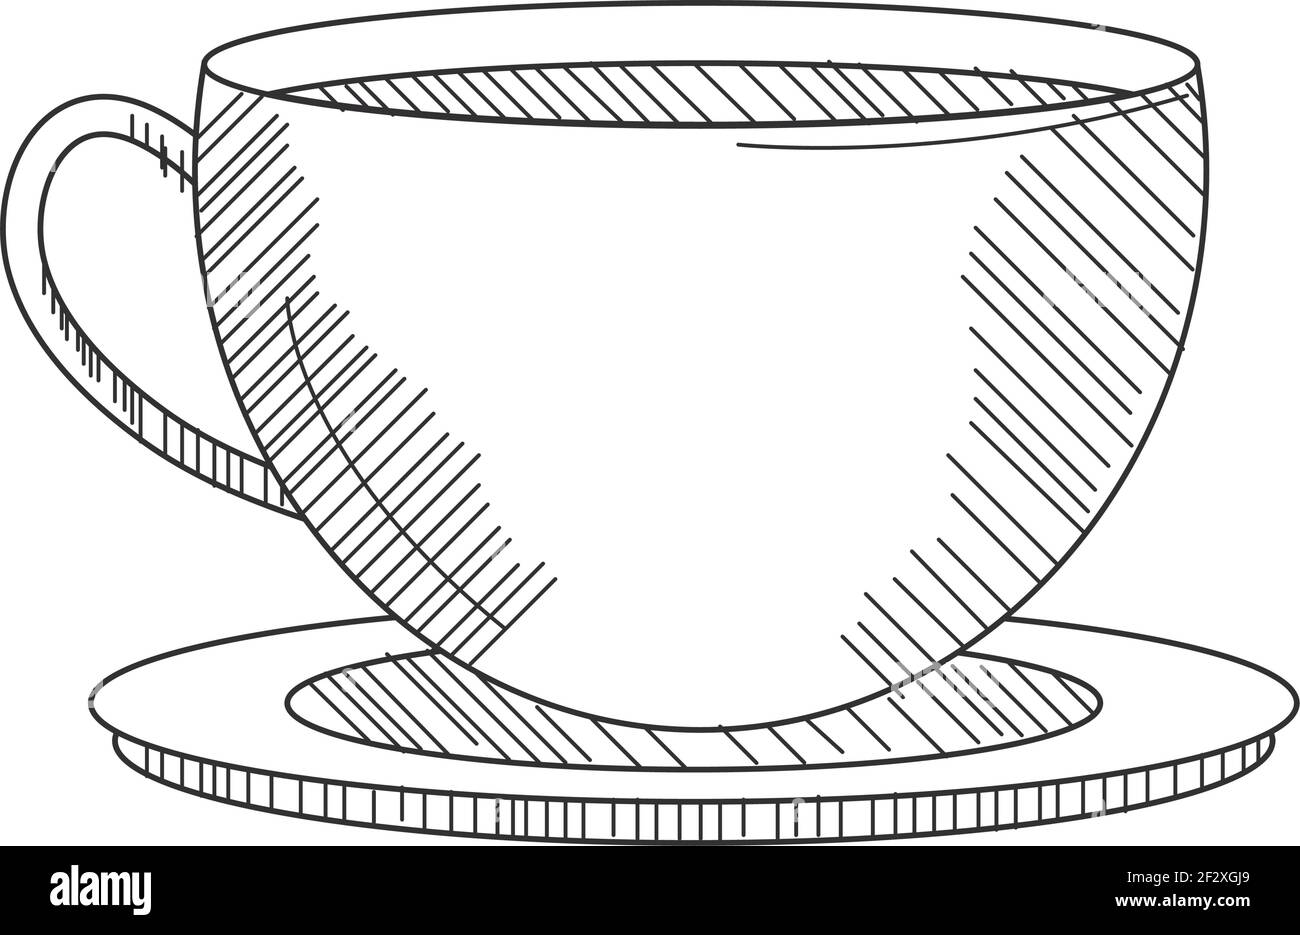 coffee cup on saucer sketch Stock Vector